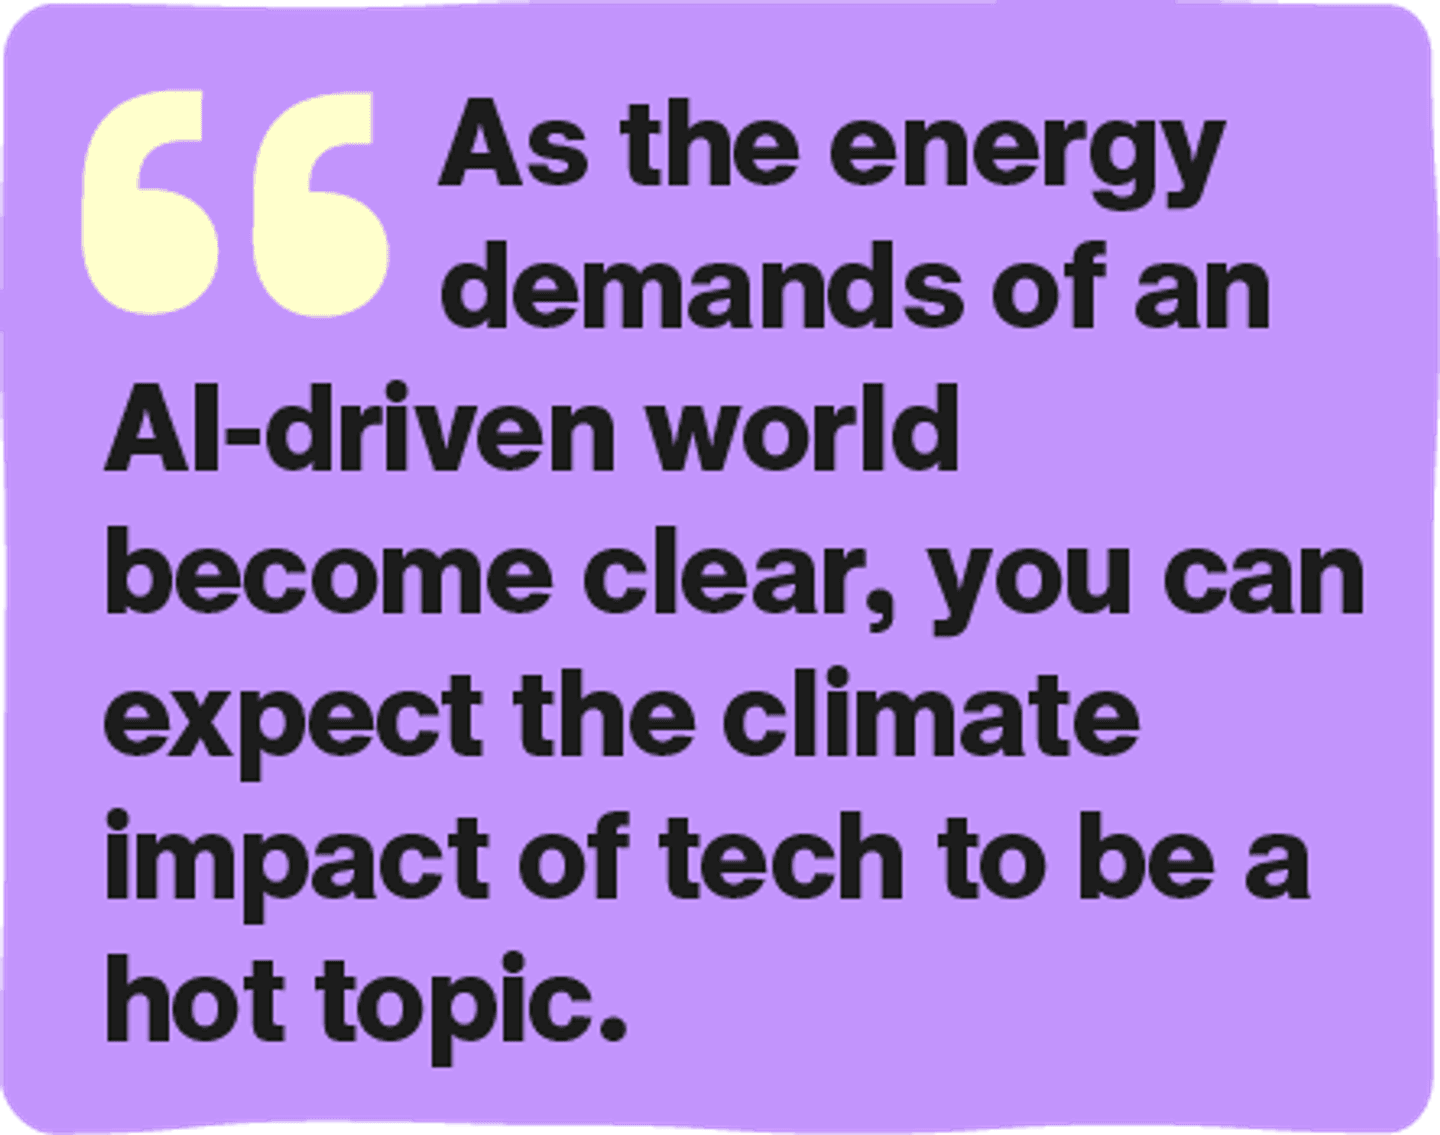 As the energy demands of an AI-driven world become clear, you can expect the climate impact of tech to be a hot topic.